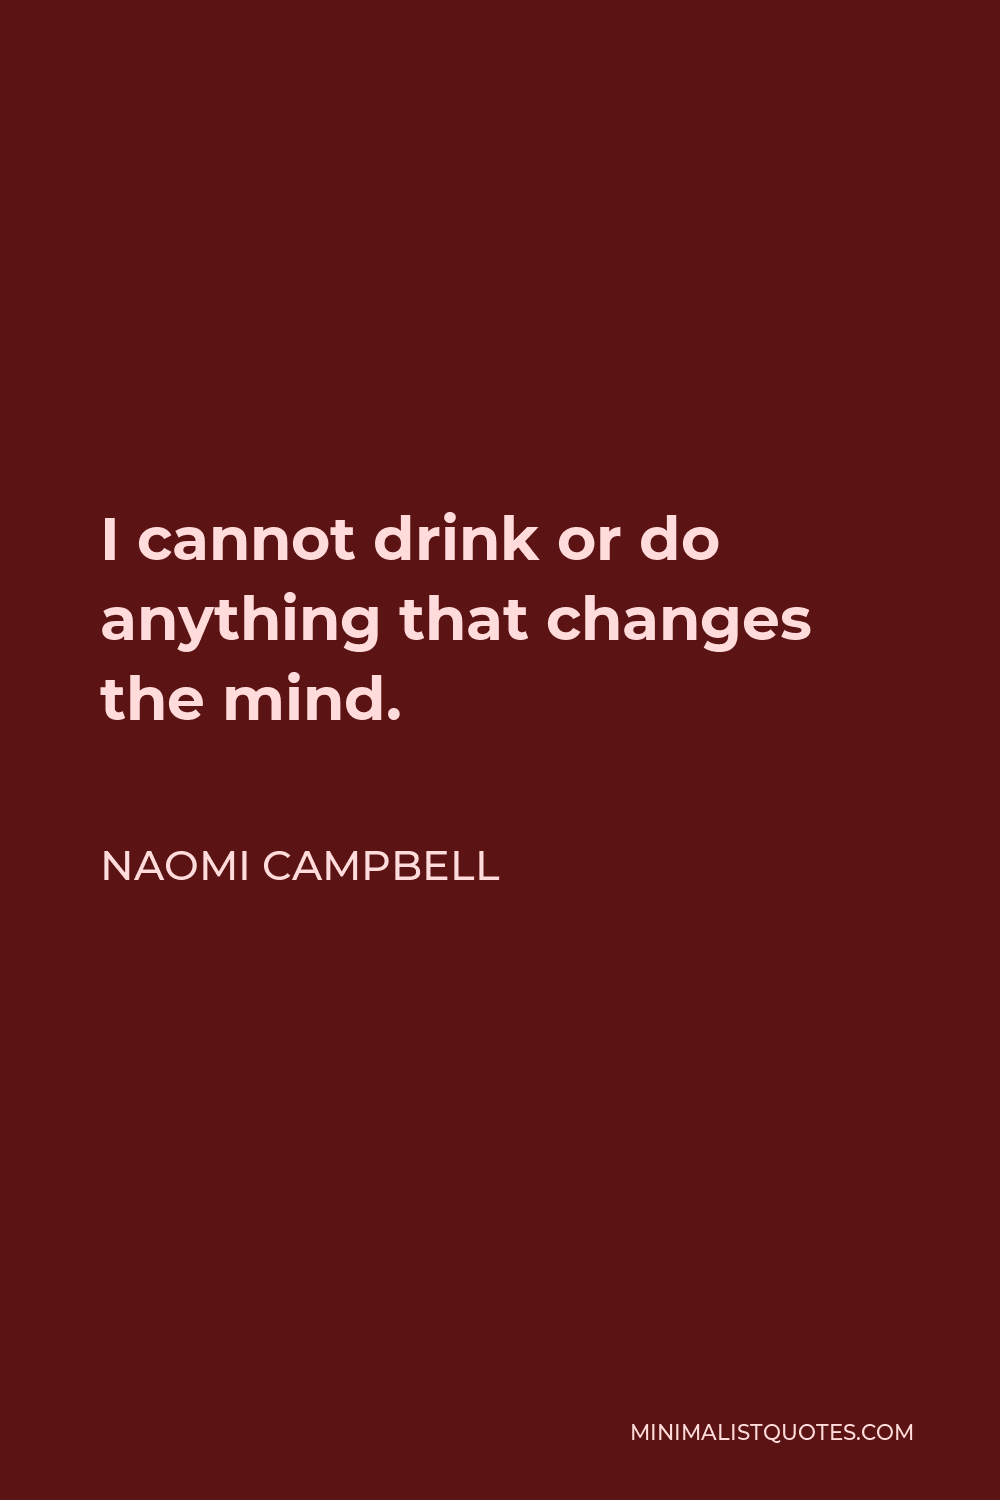 Naomi Campbell Quote - I cannot drink or do anything that changes the mind.